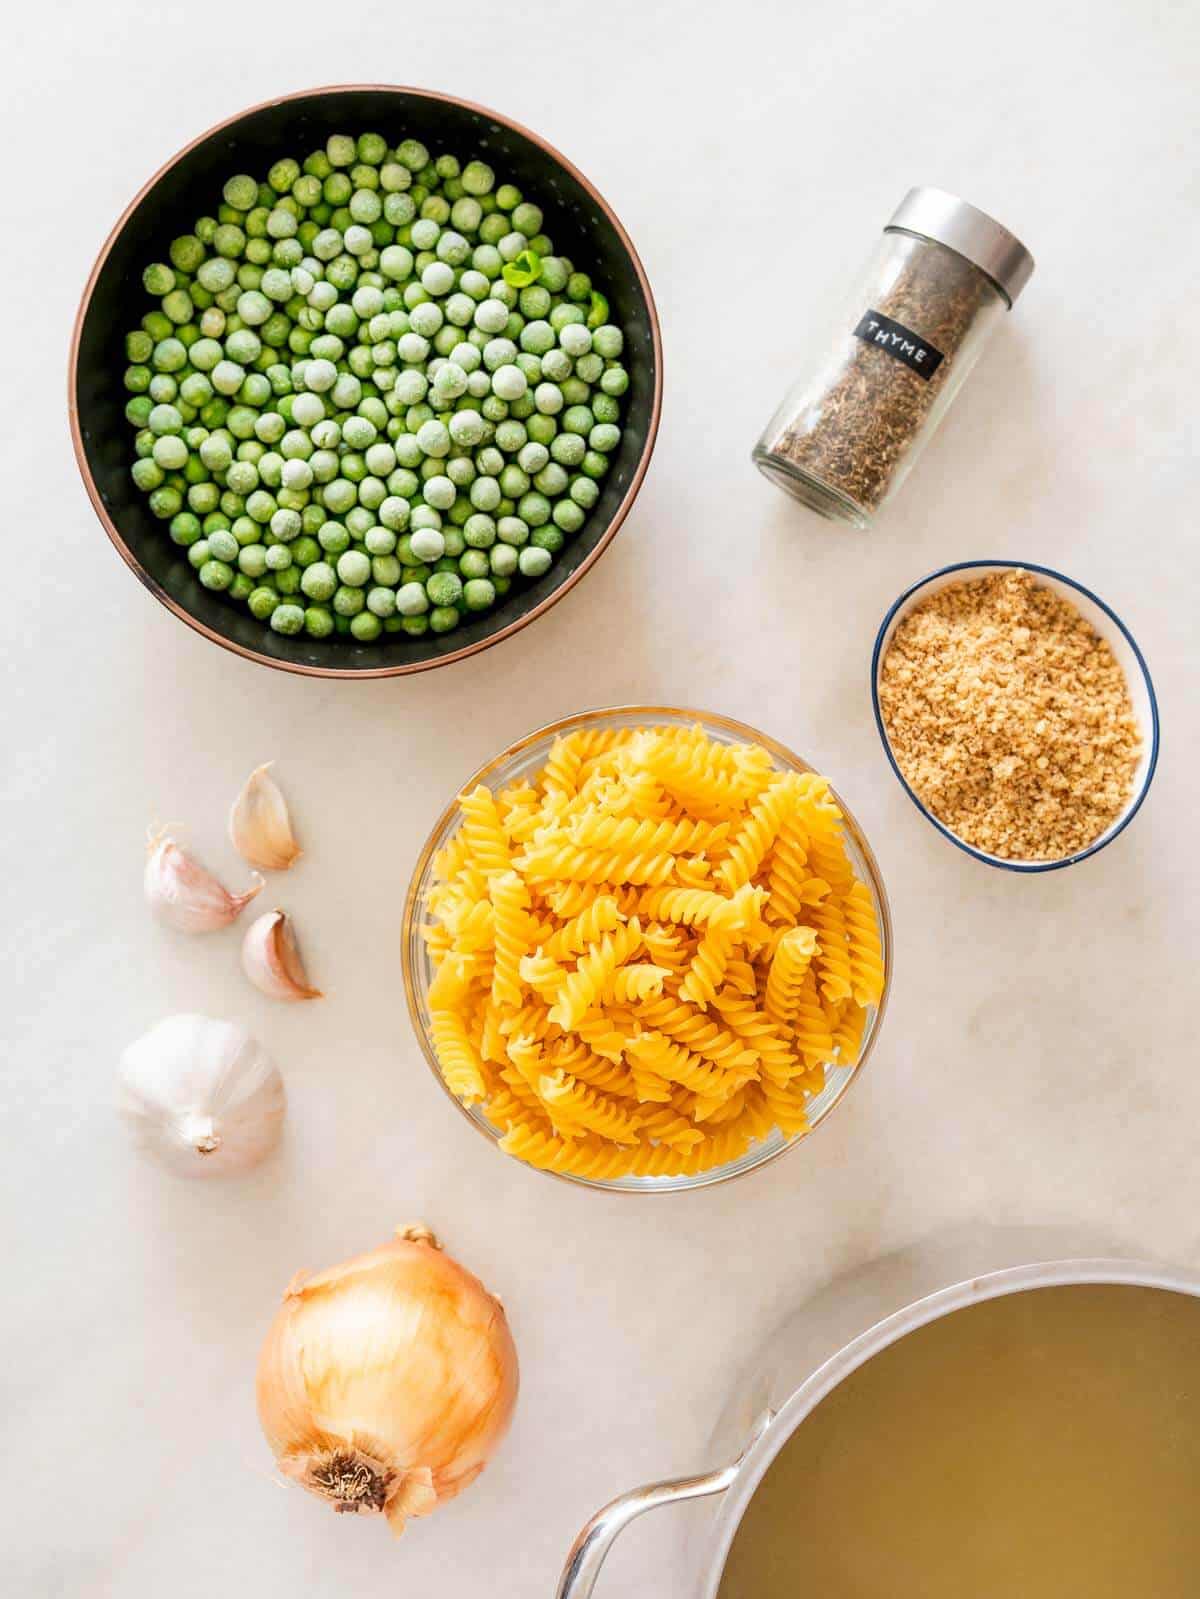 ingredients to make Italian peas and pasta.